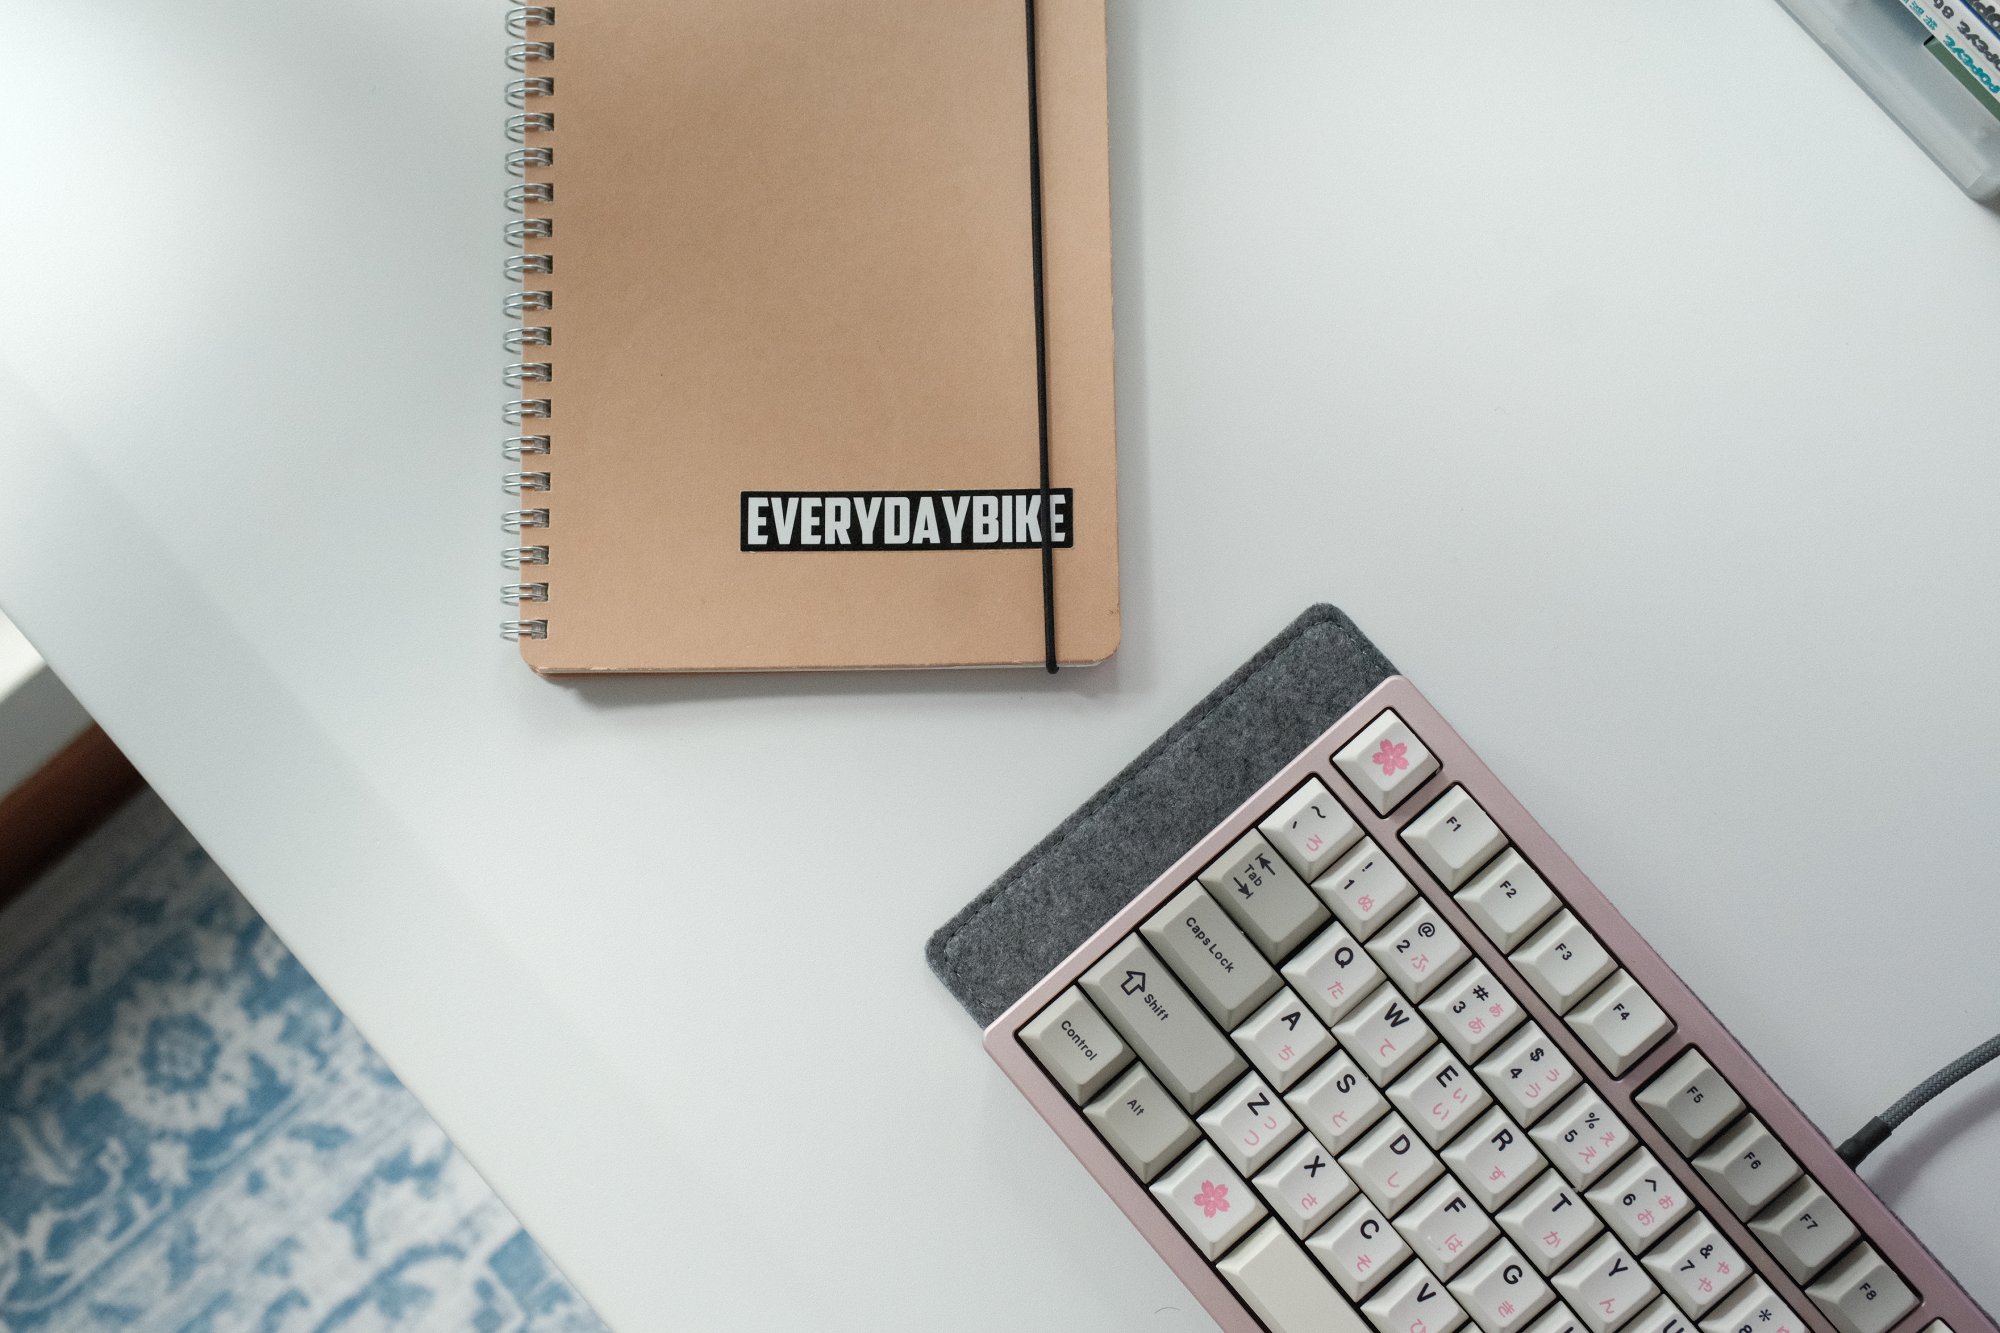 An EVERYDAYBIKE notepad and a pink custom mechanical keyboard lying on a white desk